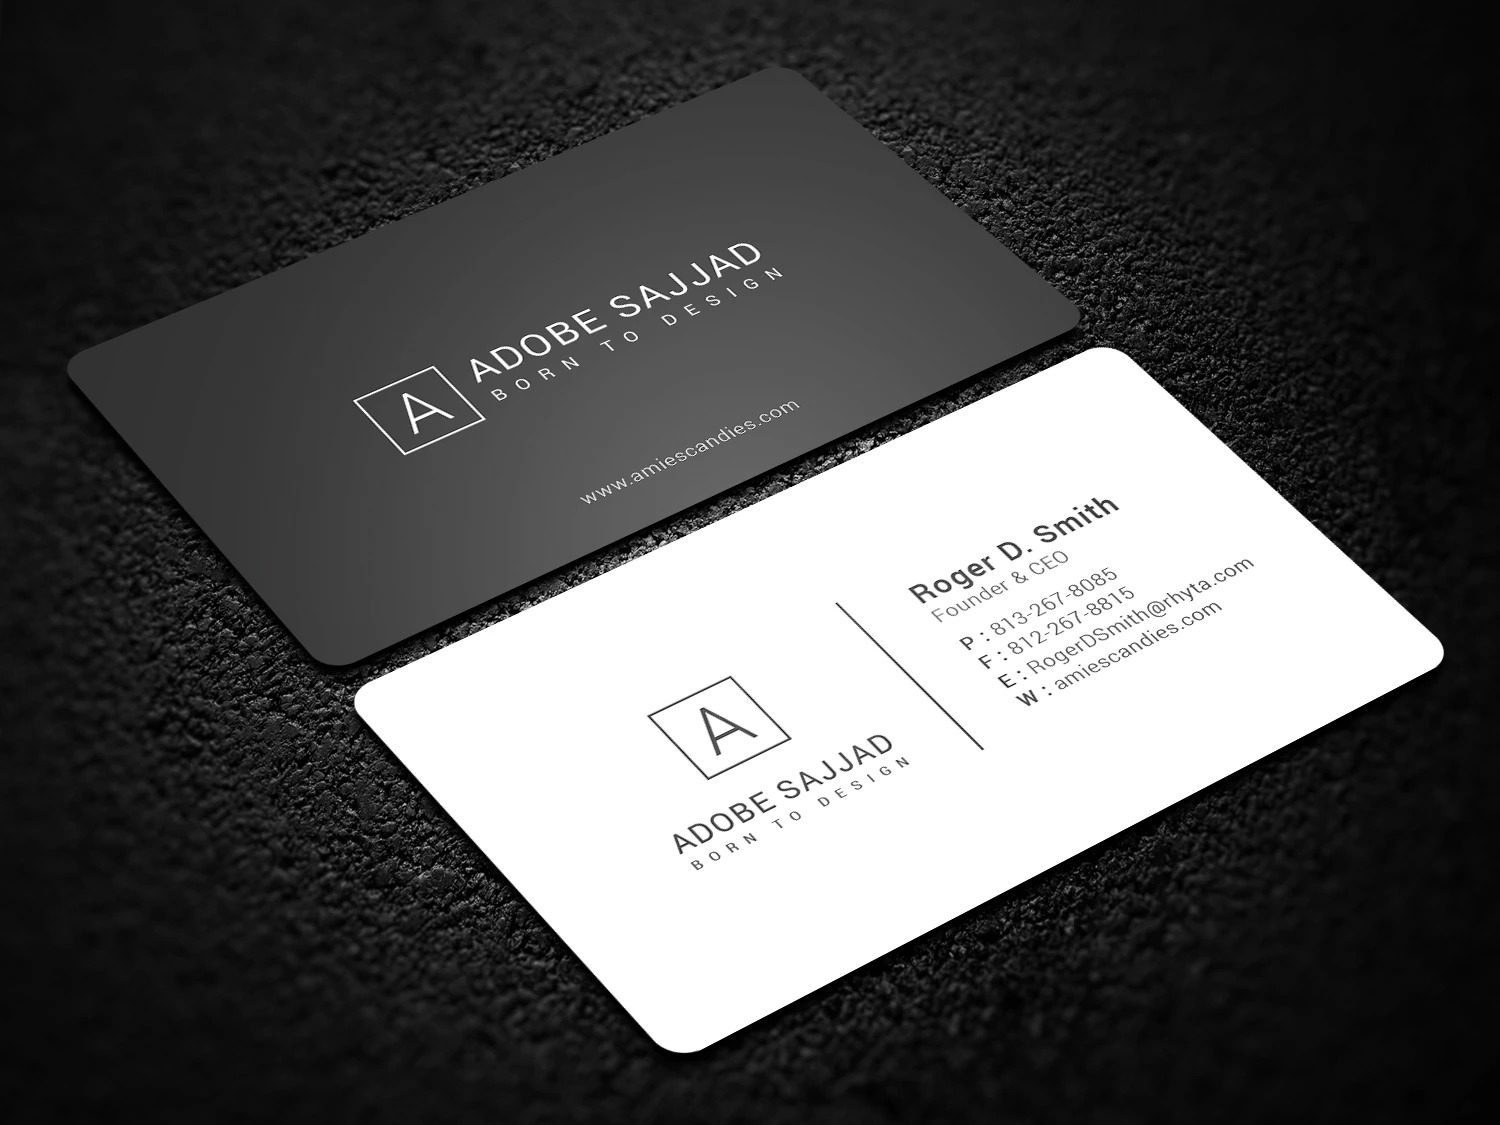 Business Card Design Software : Design a professional and high quality business card for ... : Business cards are a staple of the corporate and professional world.